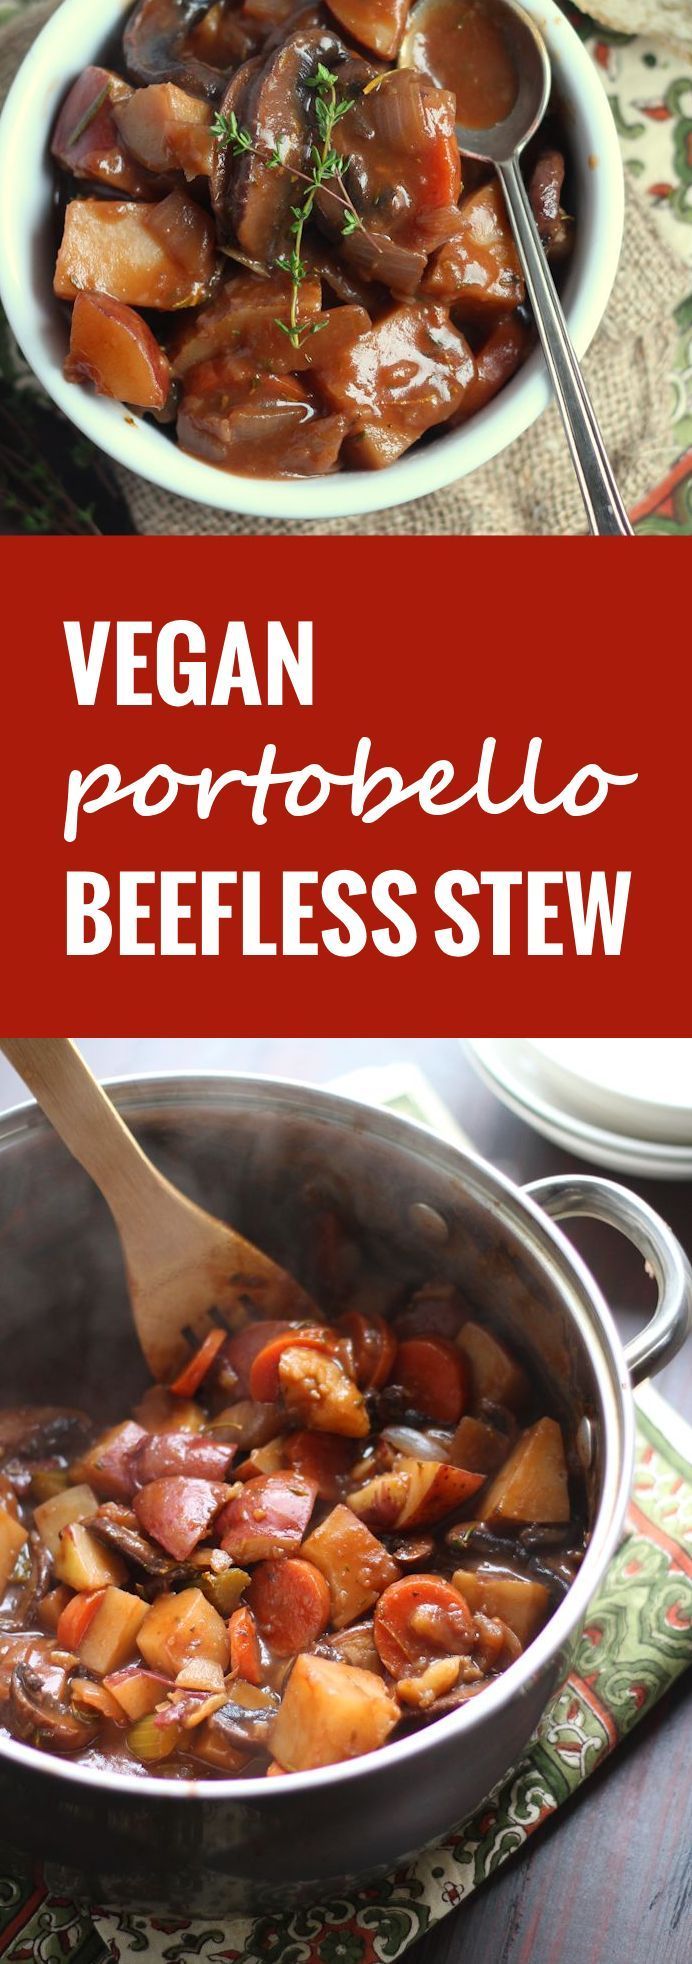 This hearty vegan beef stew uses tender portobello mushrooms in place of meat, along with potatoes and veggies in an herbed red